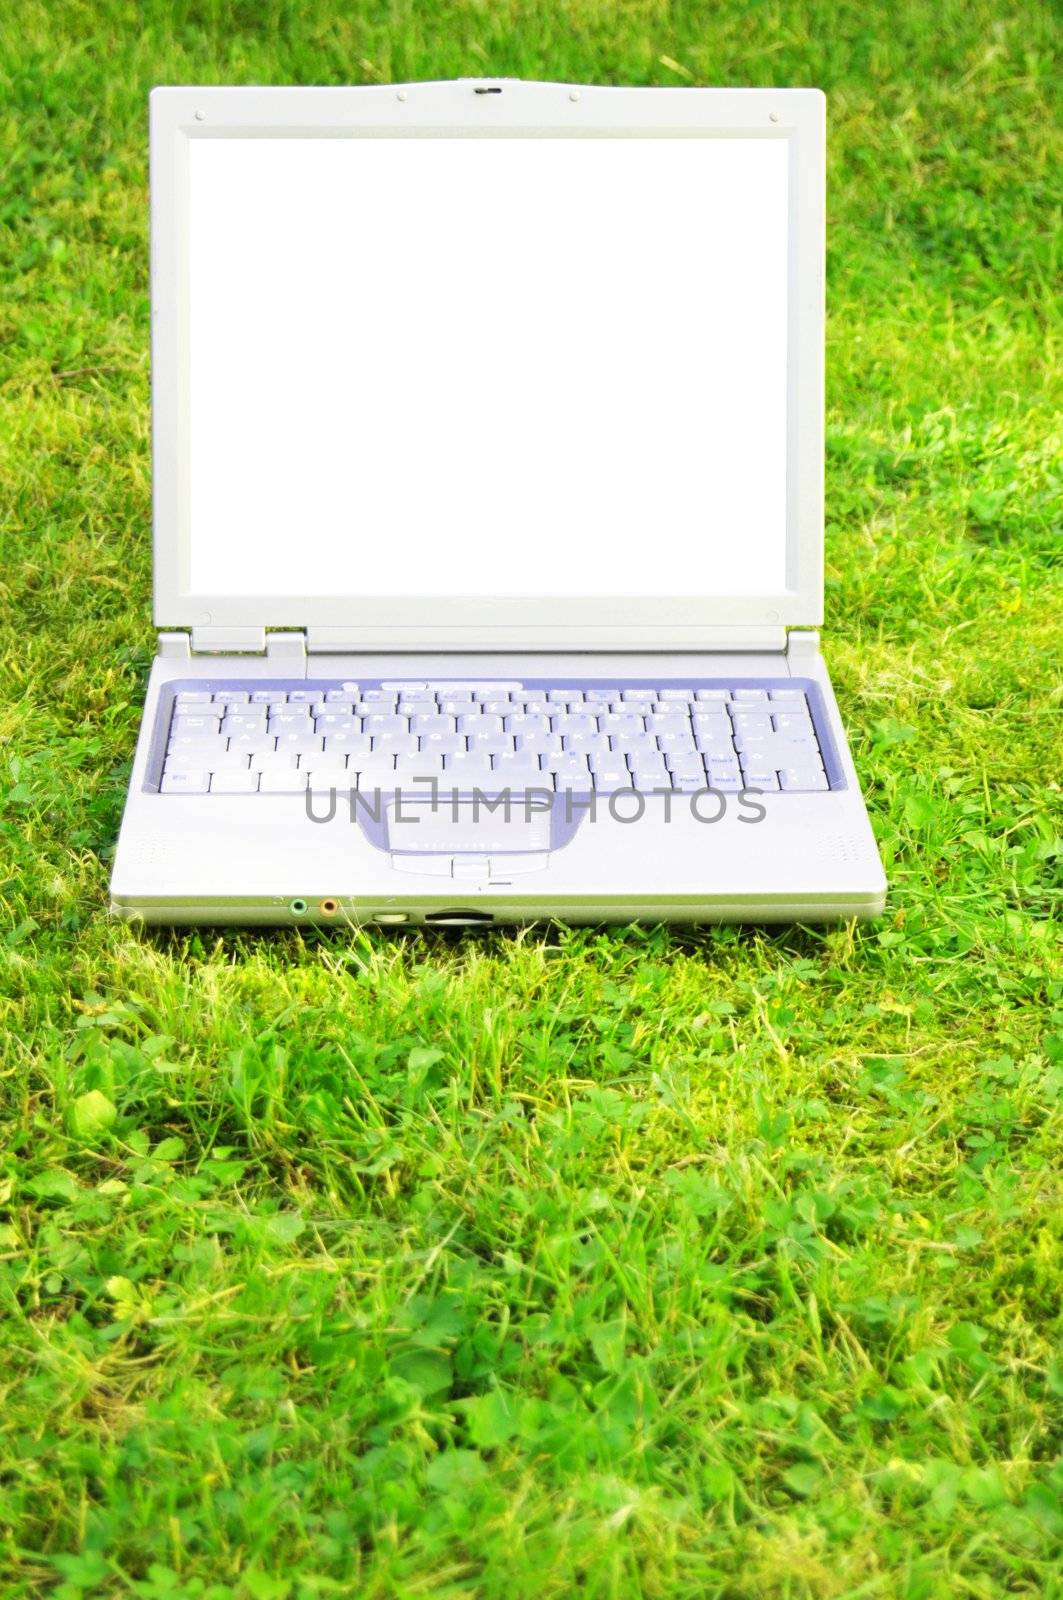 laptopn in green grass with blank or empty screen for copyspace